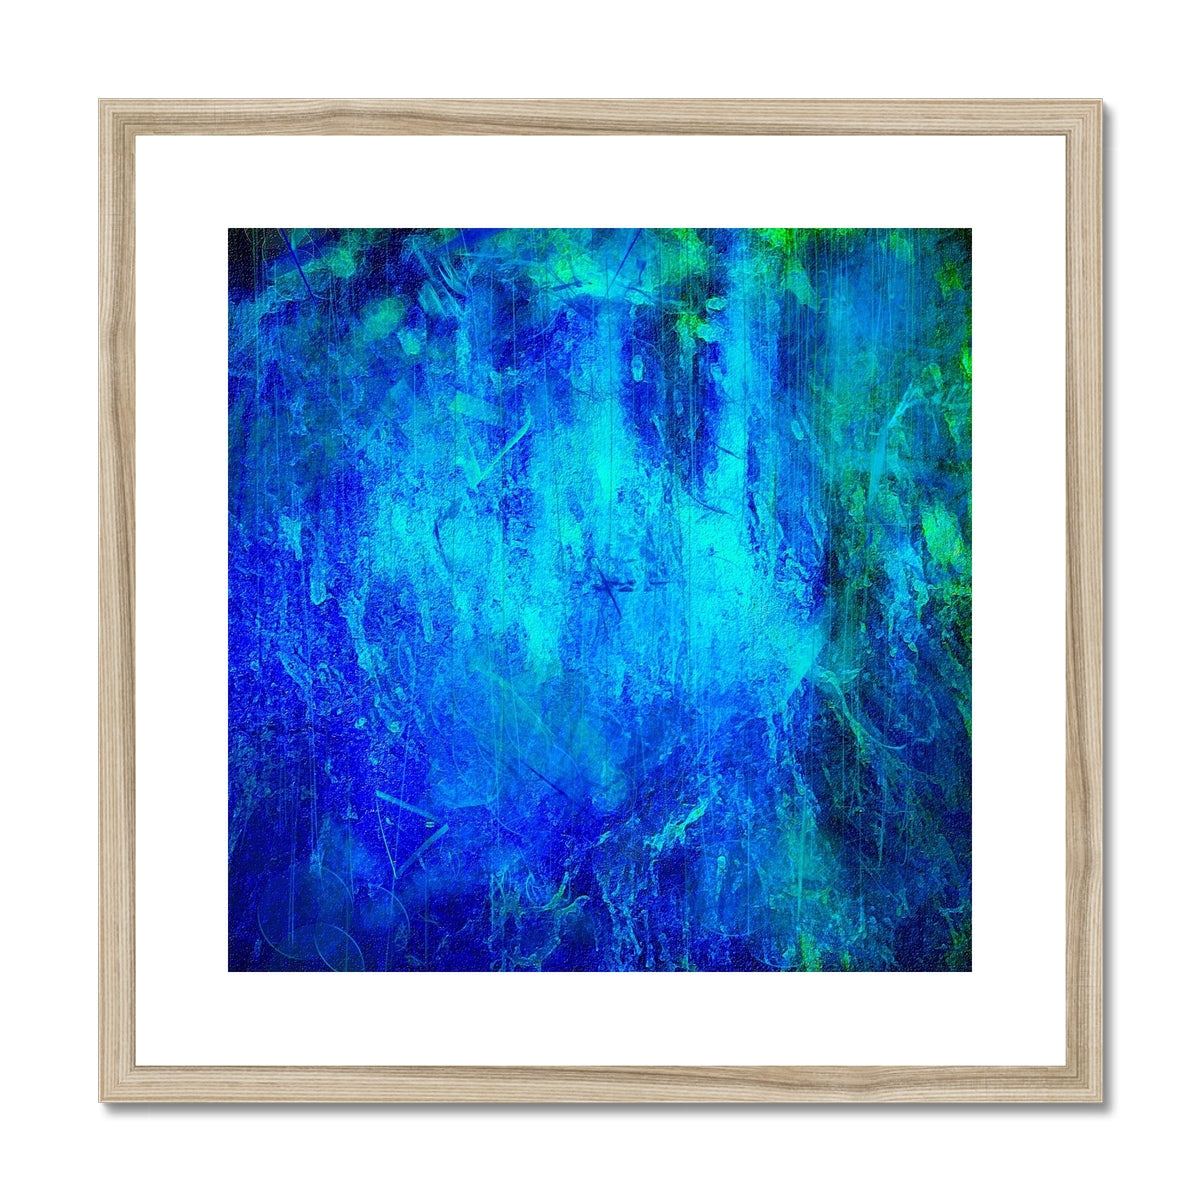 The Waterfall Abstract Painting | Framed & Mounted Prints From Scotland-Framed & Mounted Prints-Abstract & Impressionistic Art Gallery-20"x20"-Natural Frame-Paintings, Prints, Homeware, Art Gifts From Scotland By Scottish Artist Kevin Hunter